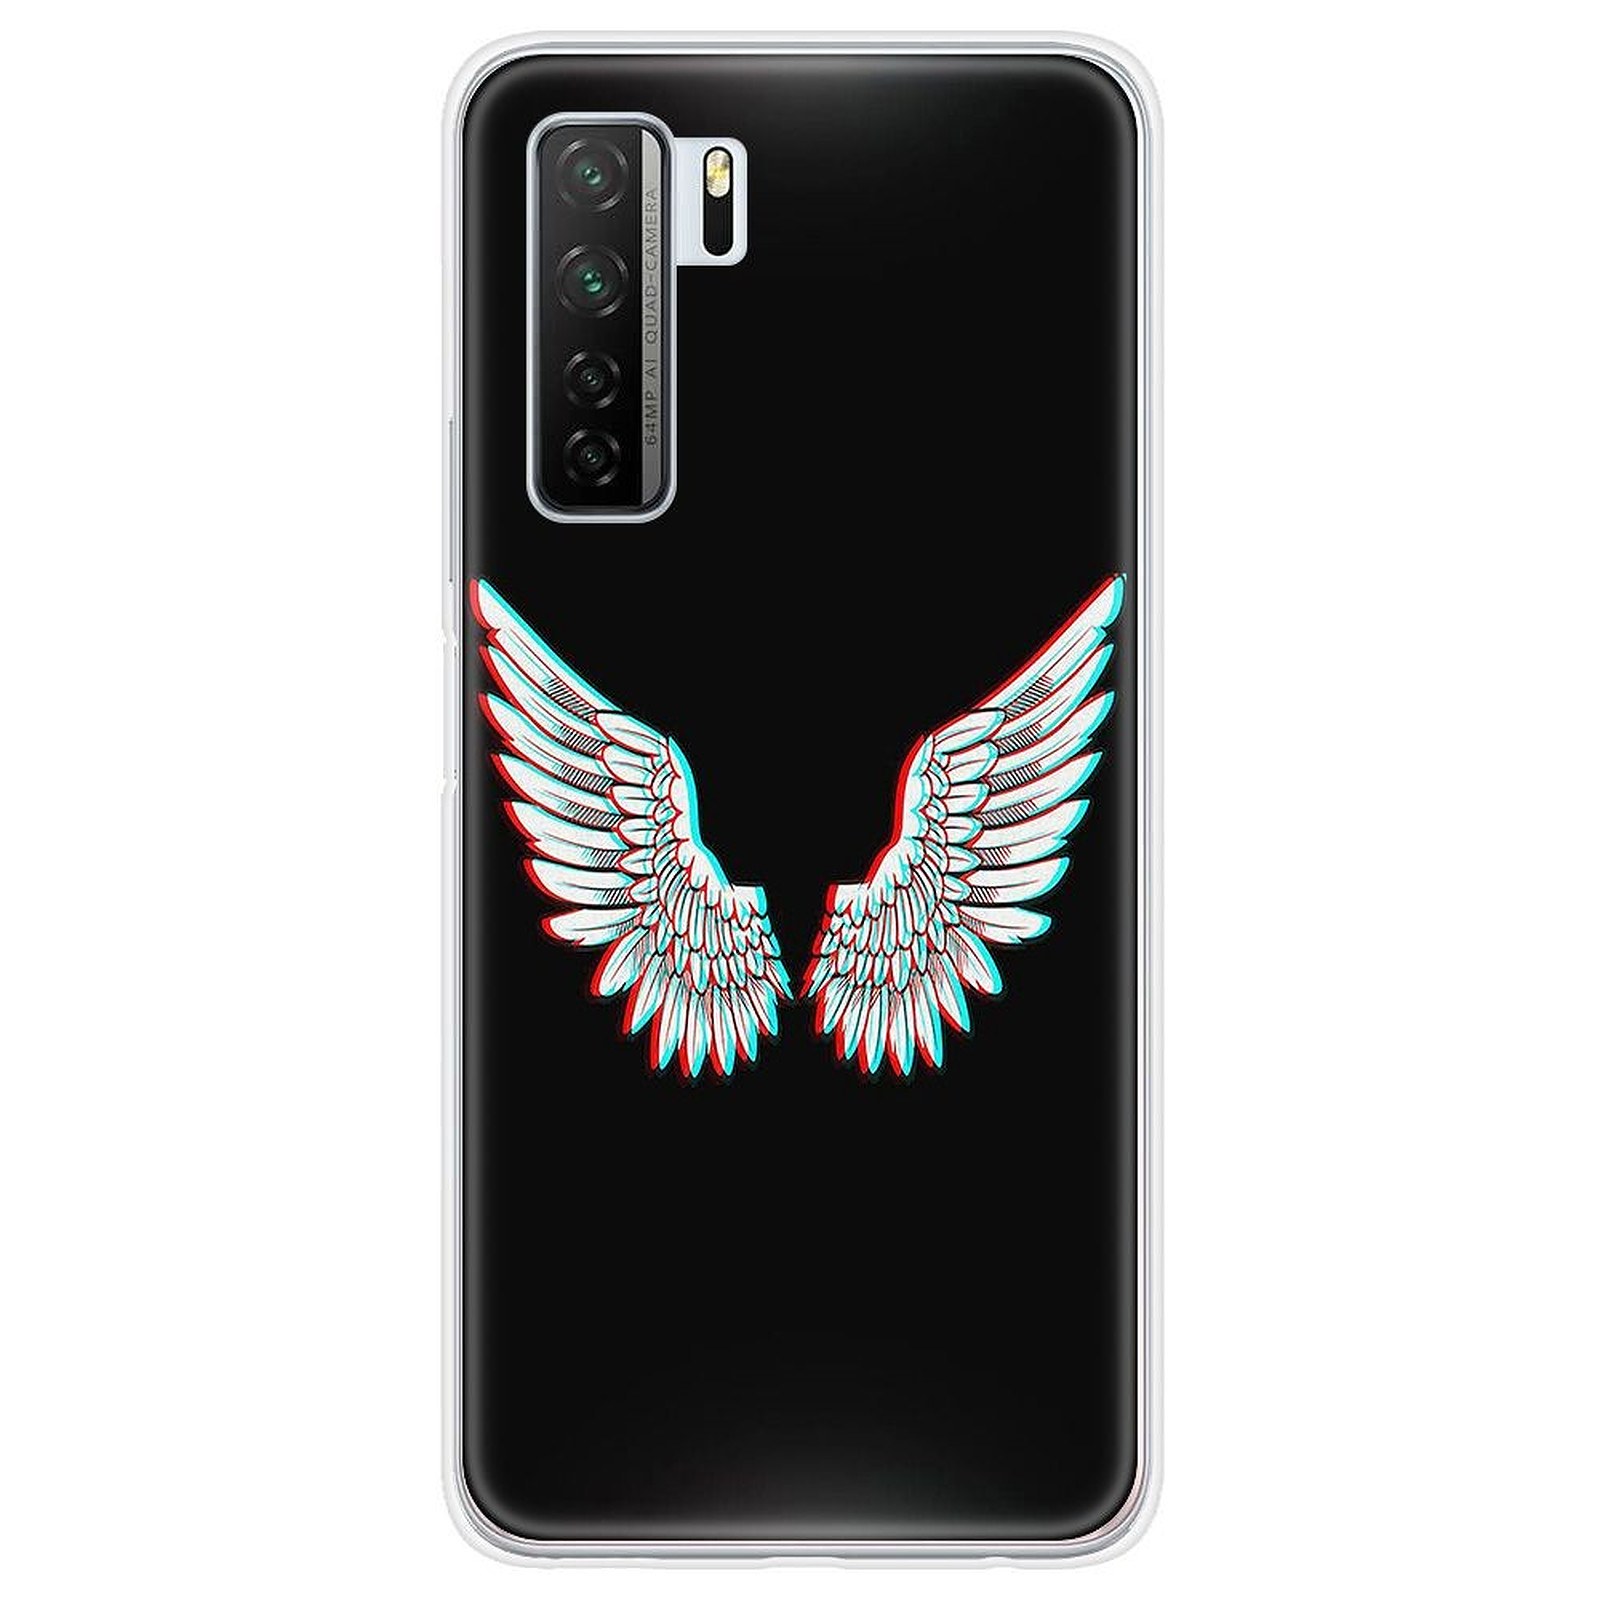 1001 Coques Coque silicone gel Huawei P40 Lite 5G motif Ailes d'Ange - Coque telephone 1001Coques